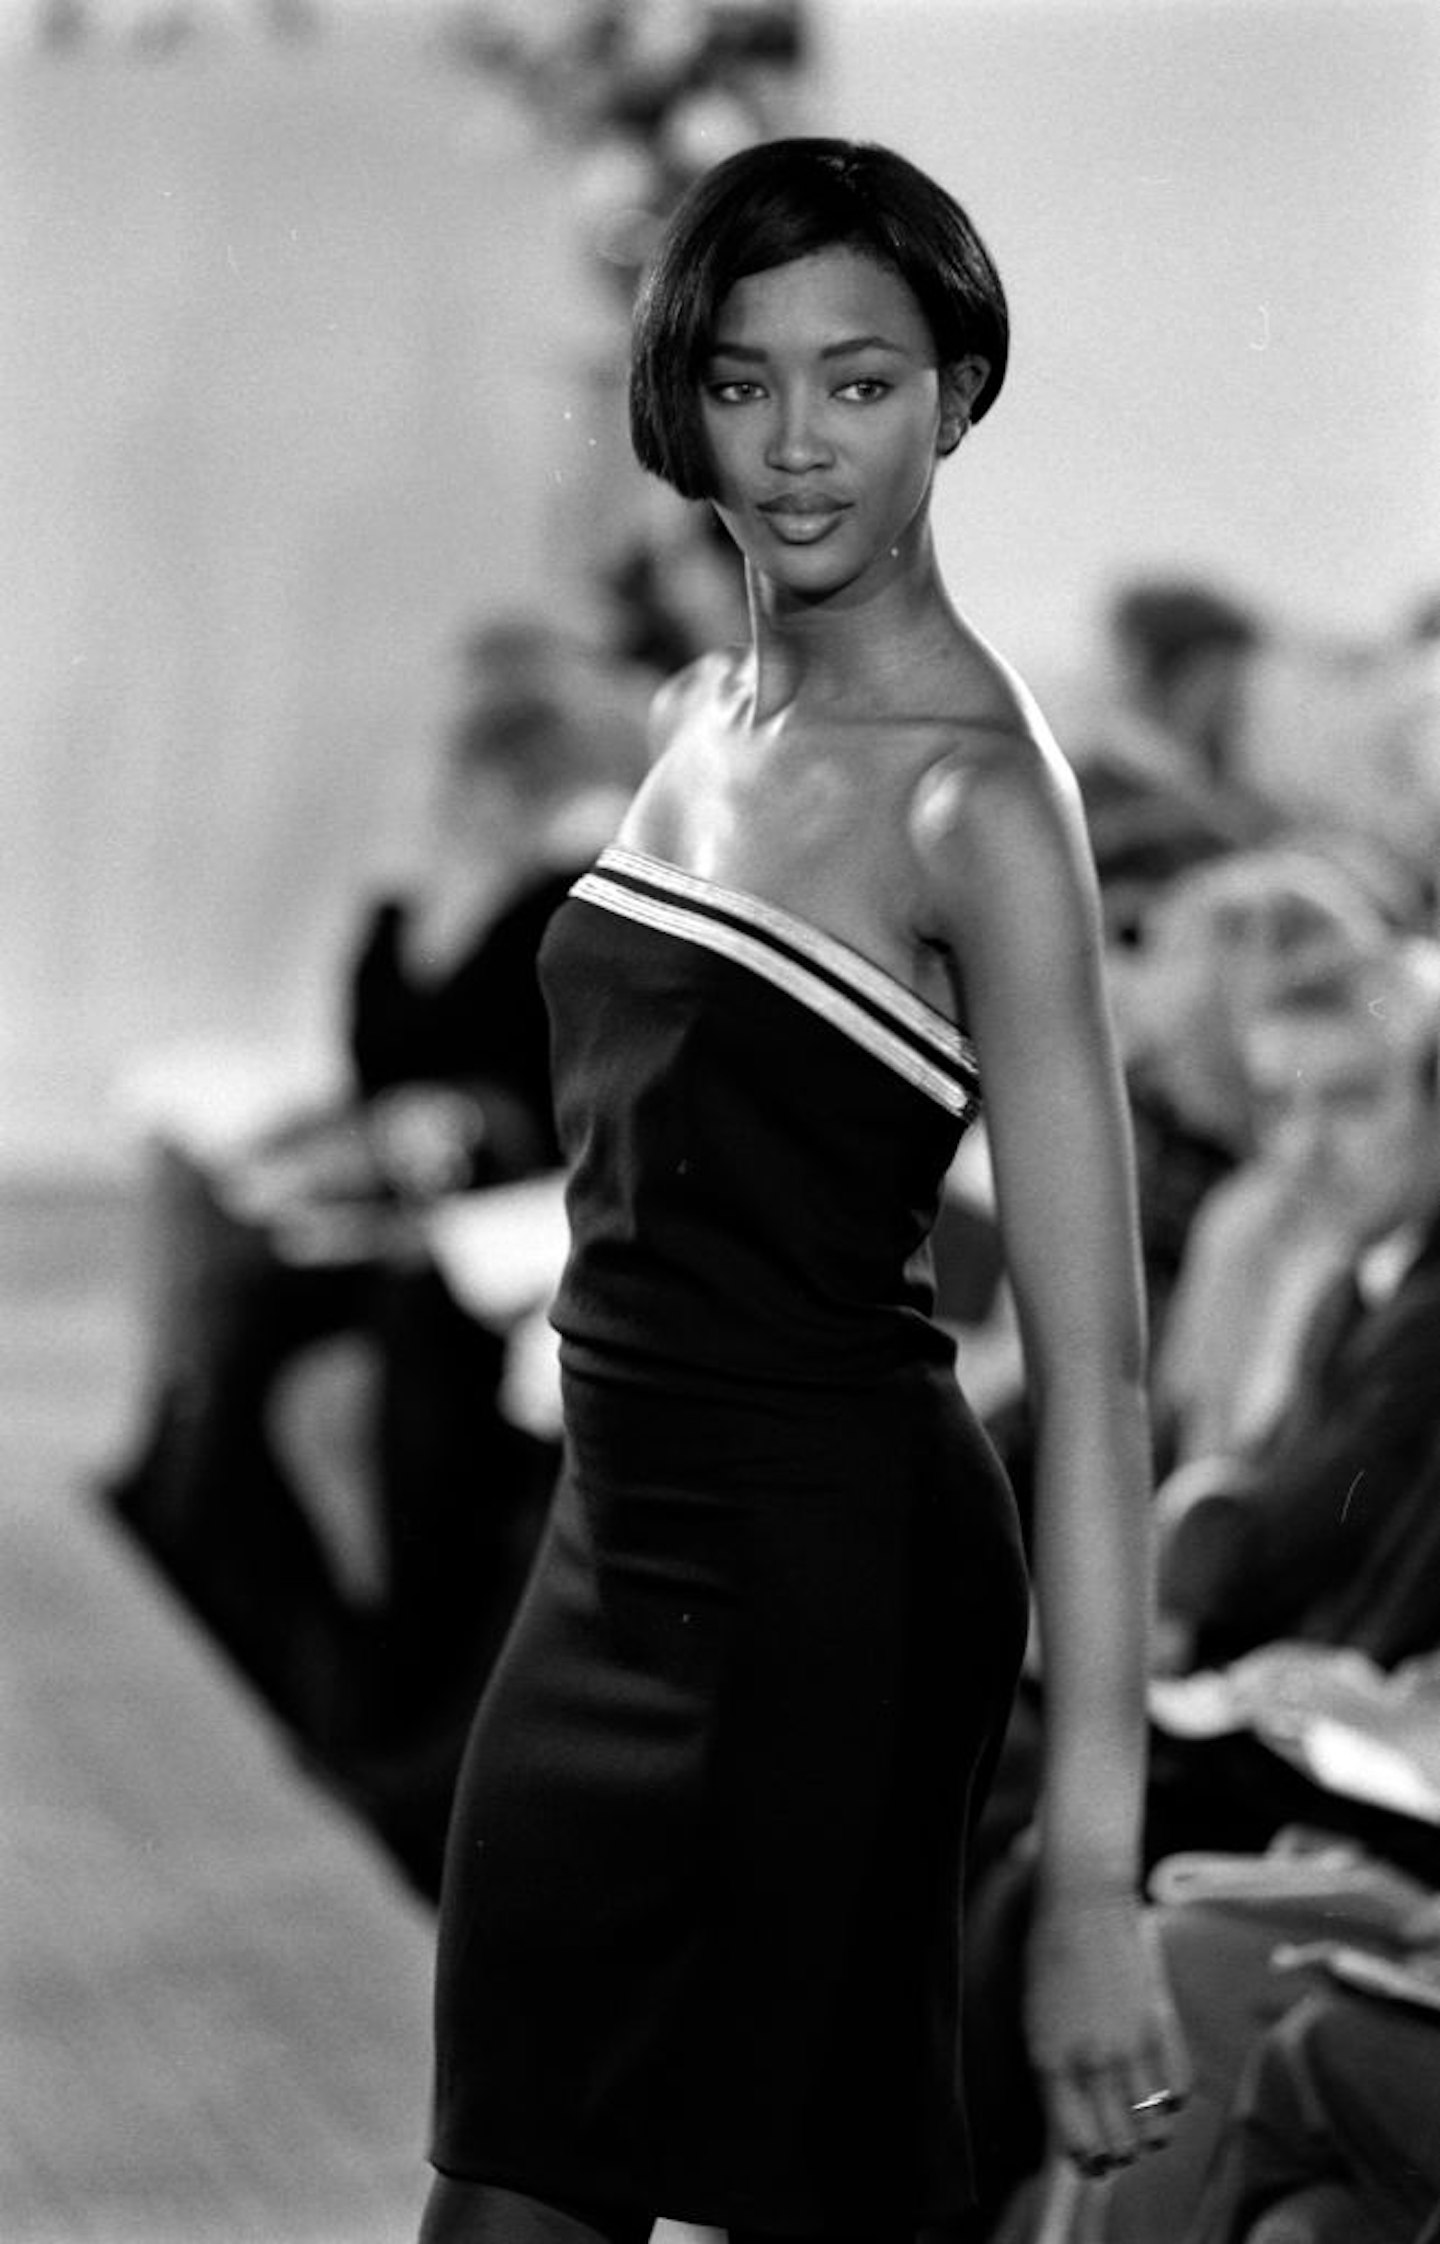 Naomi Campbell's 40 Extraordinary Years in Fashion Will Be the Subject of  an Exhibition at the V&A